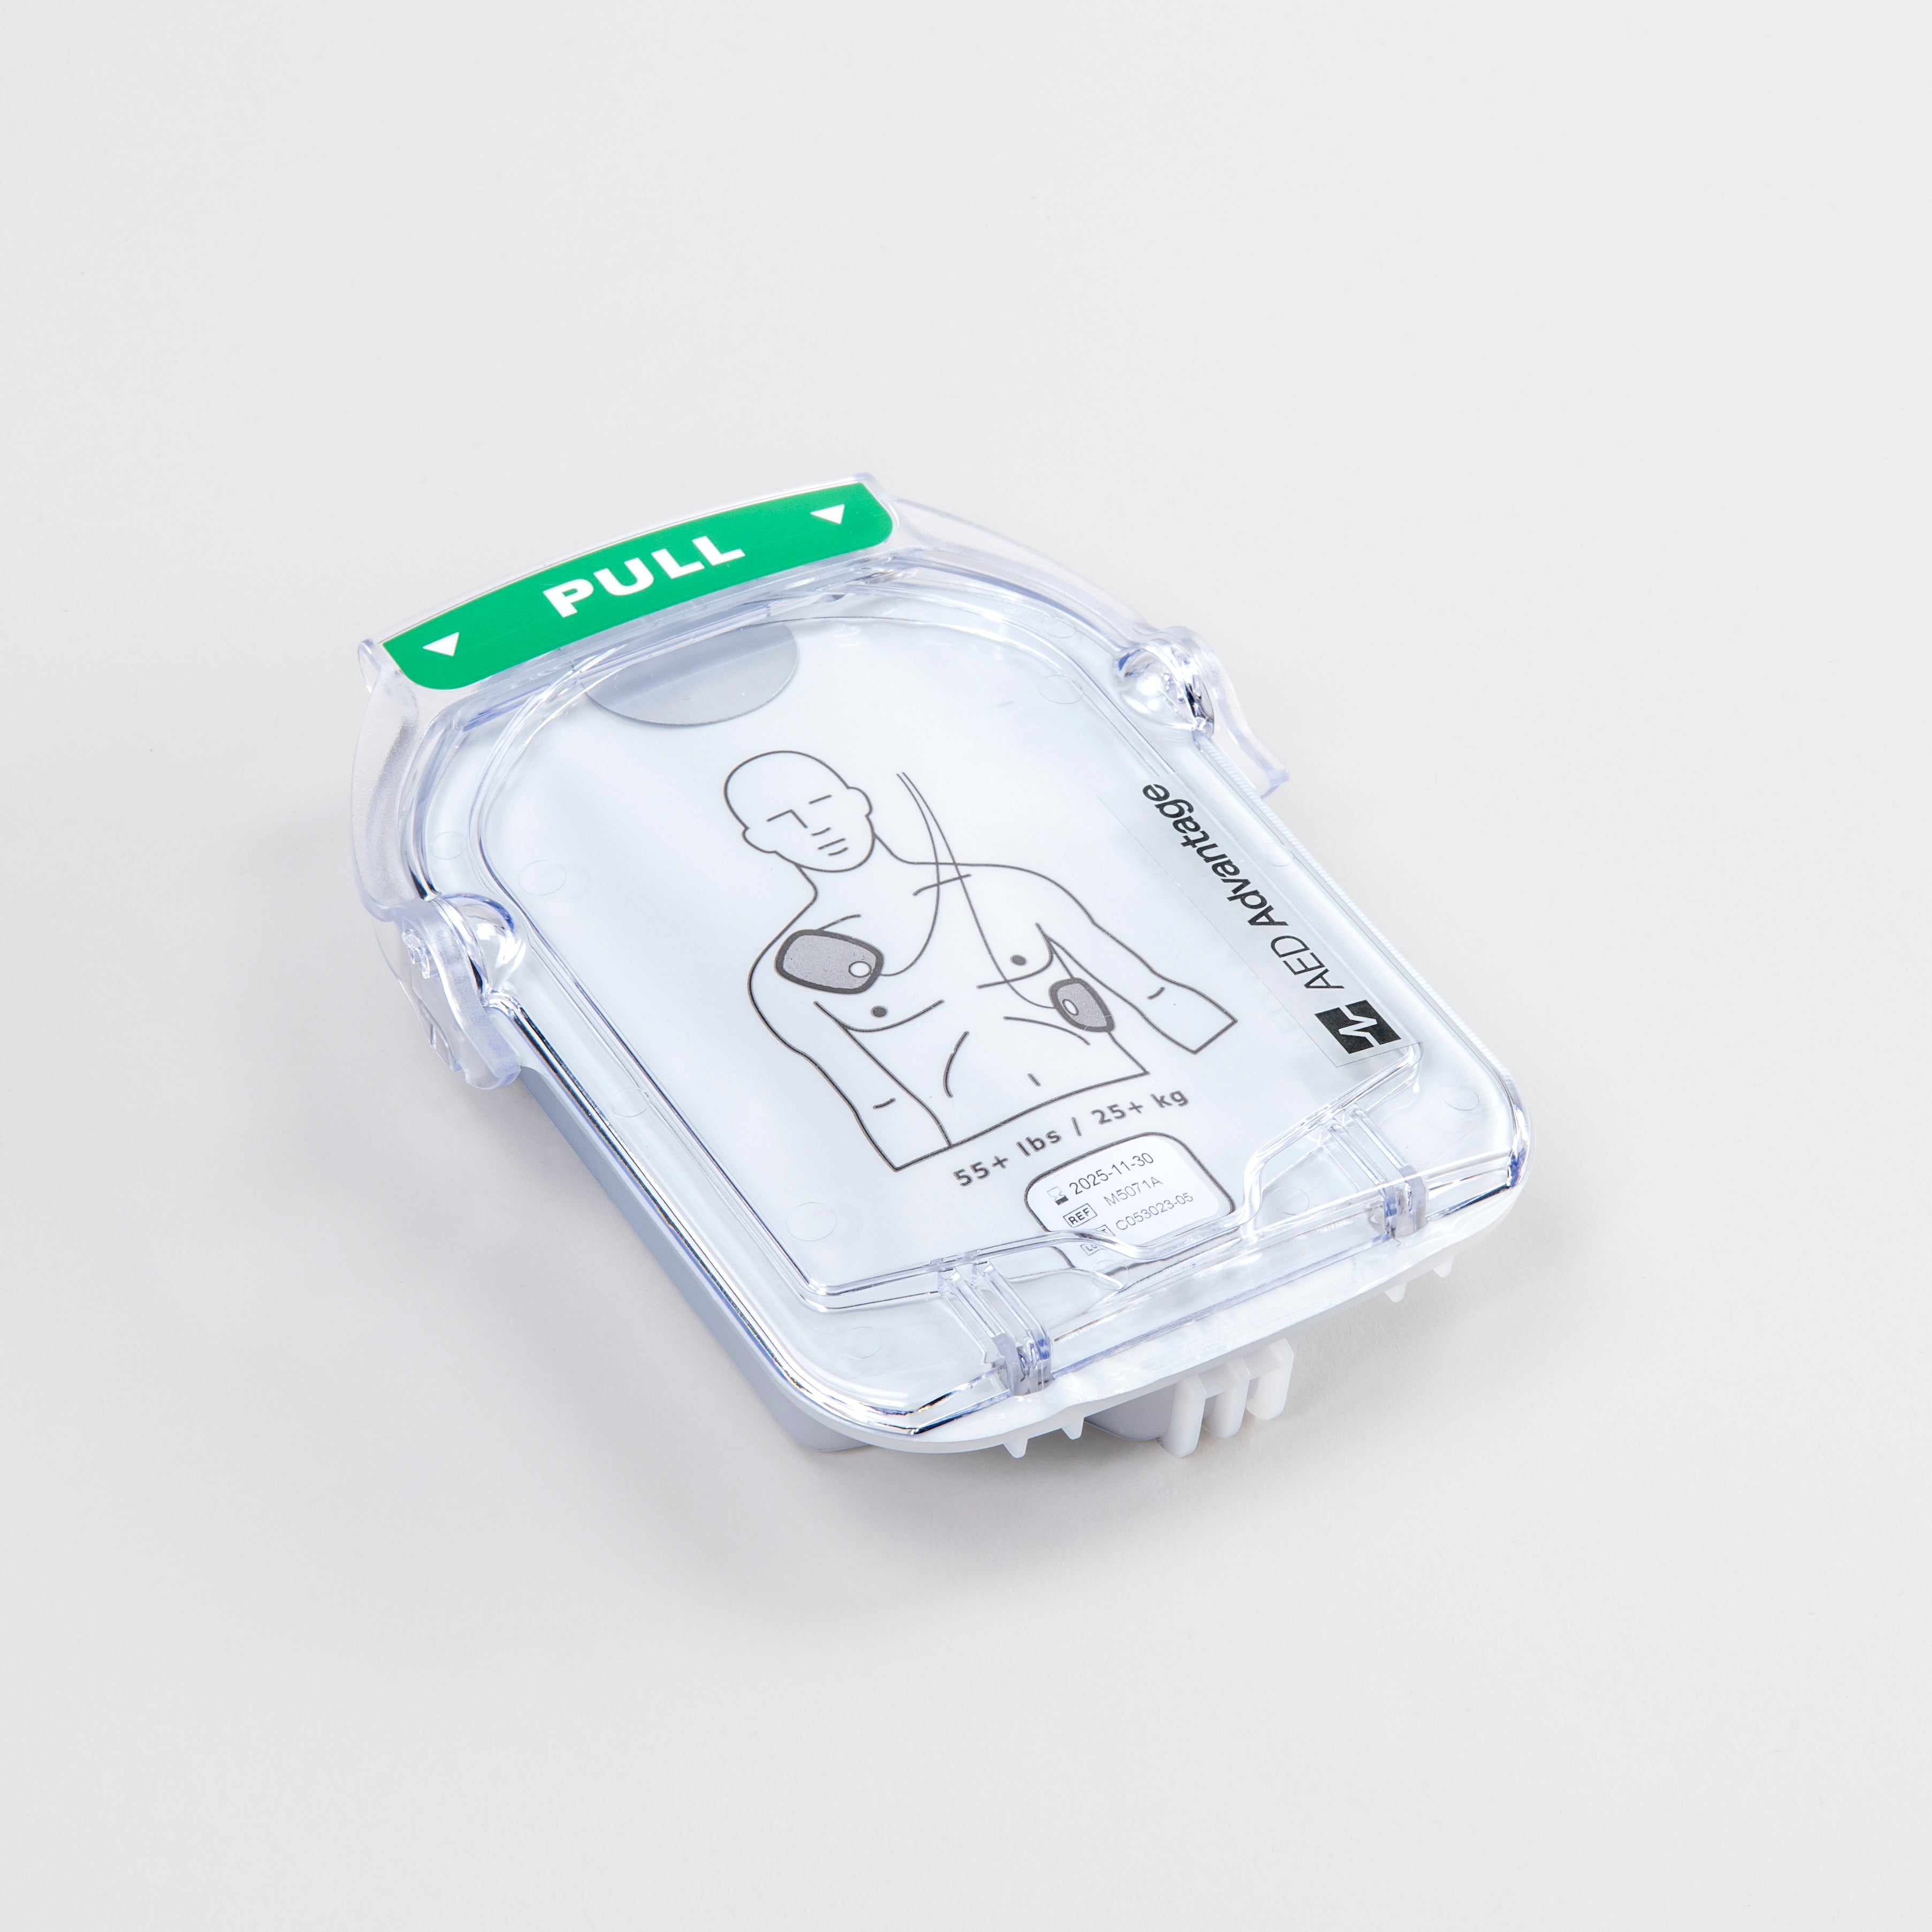 A transparent pads cartridge for the Philips OnSite AED